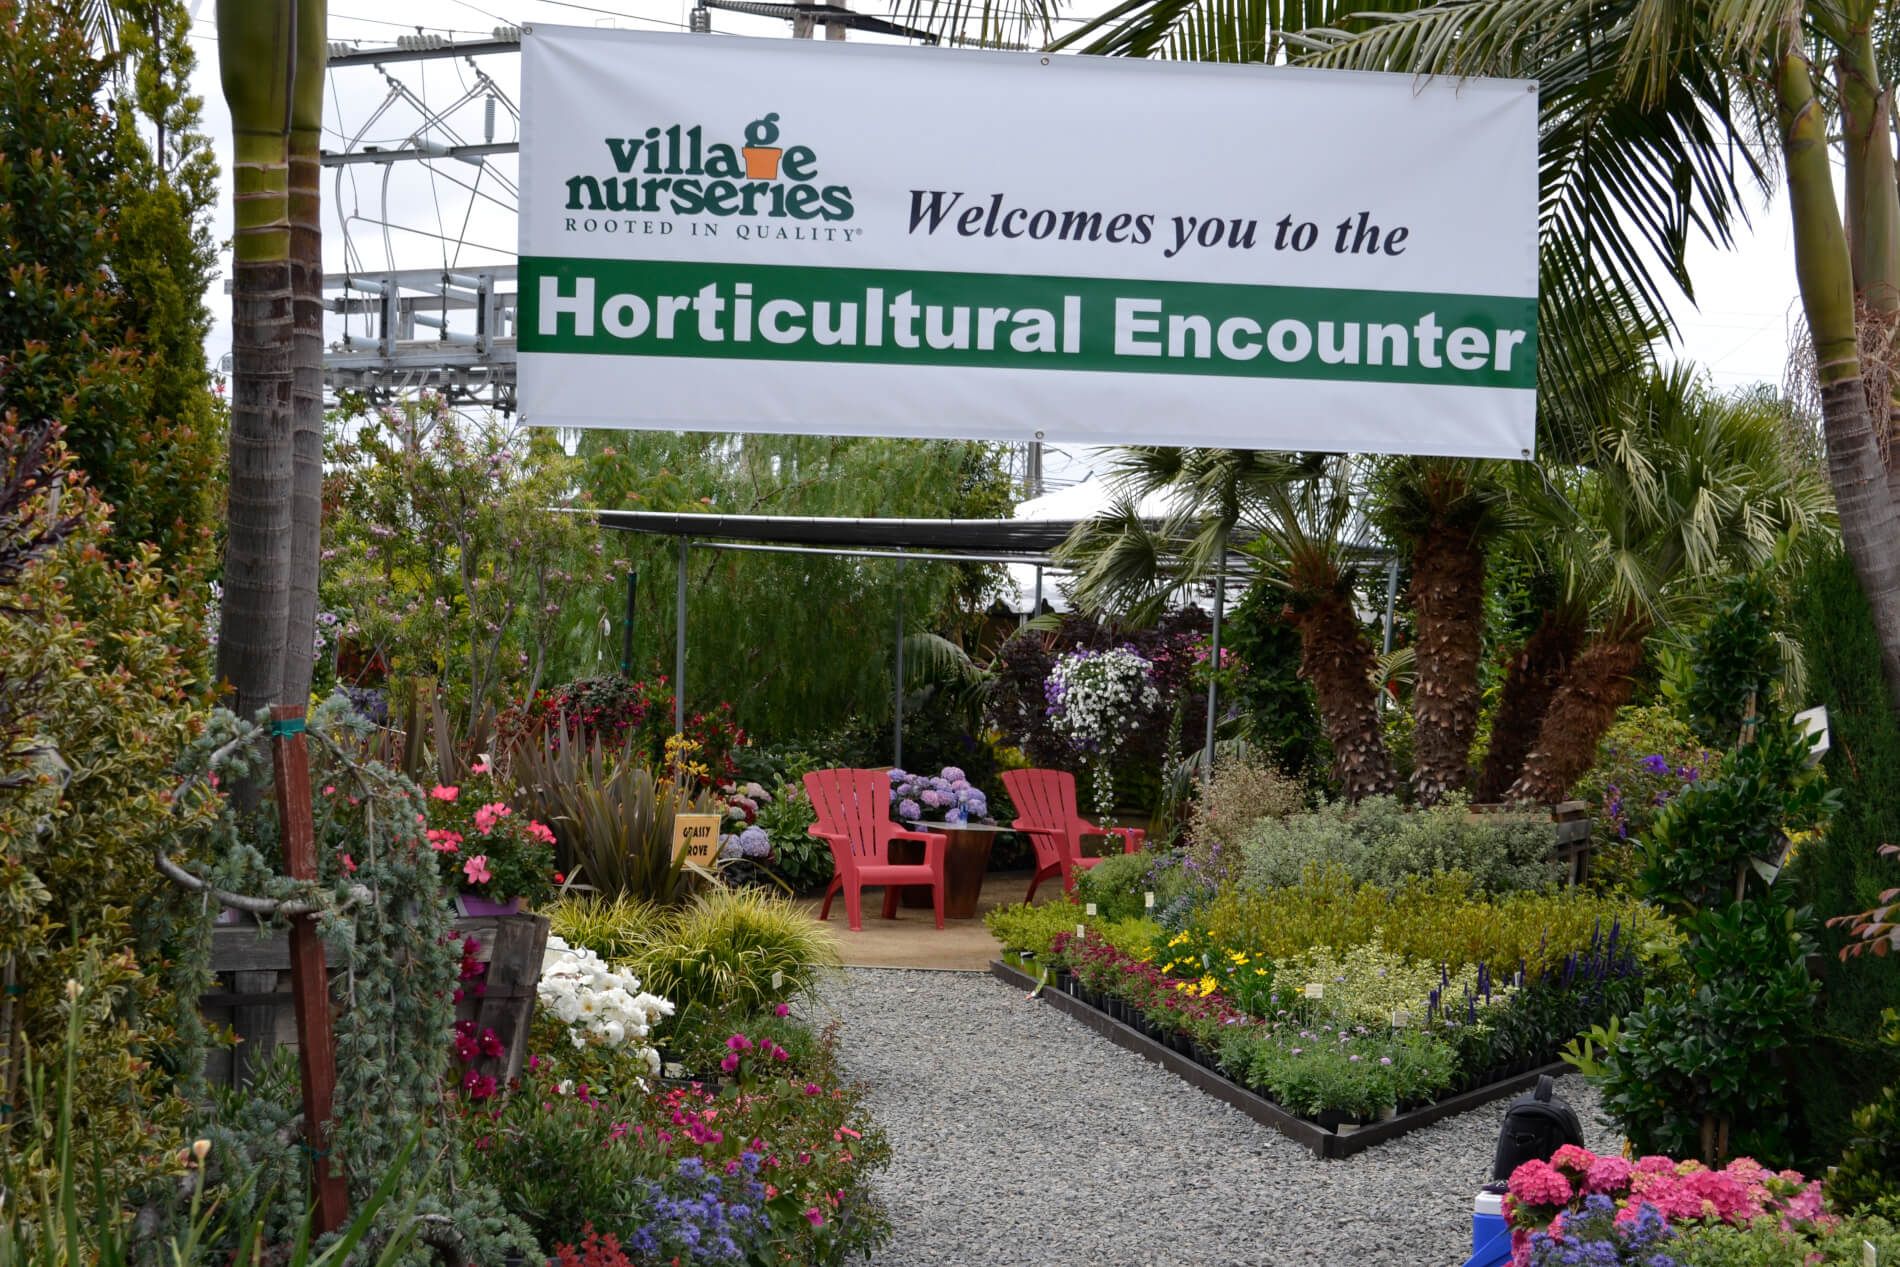 The The Village Nurseries outlet